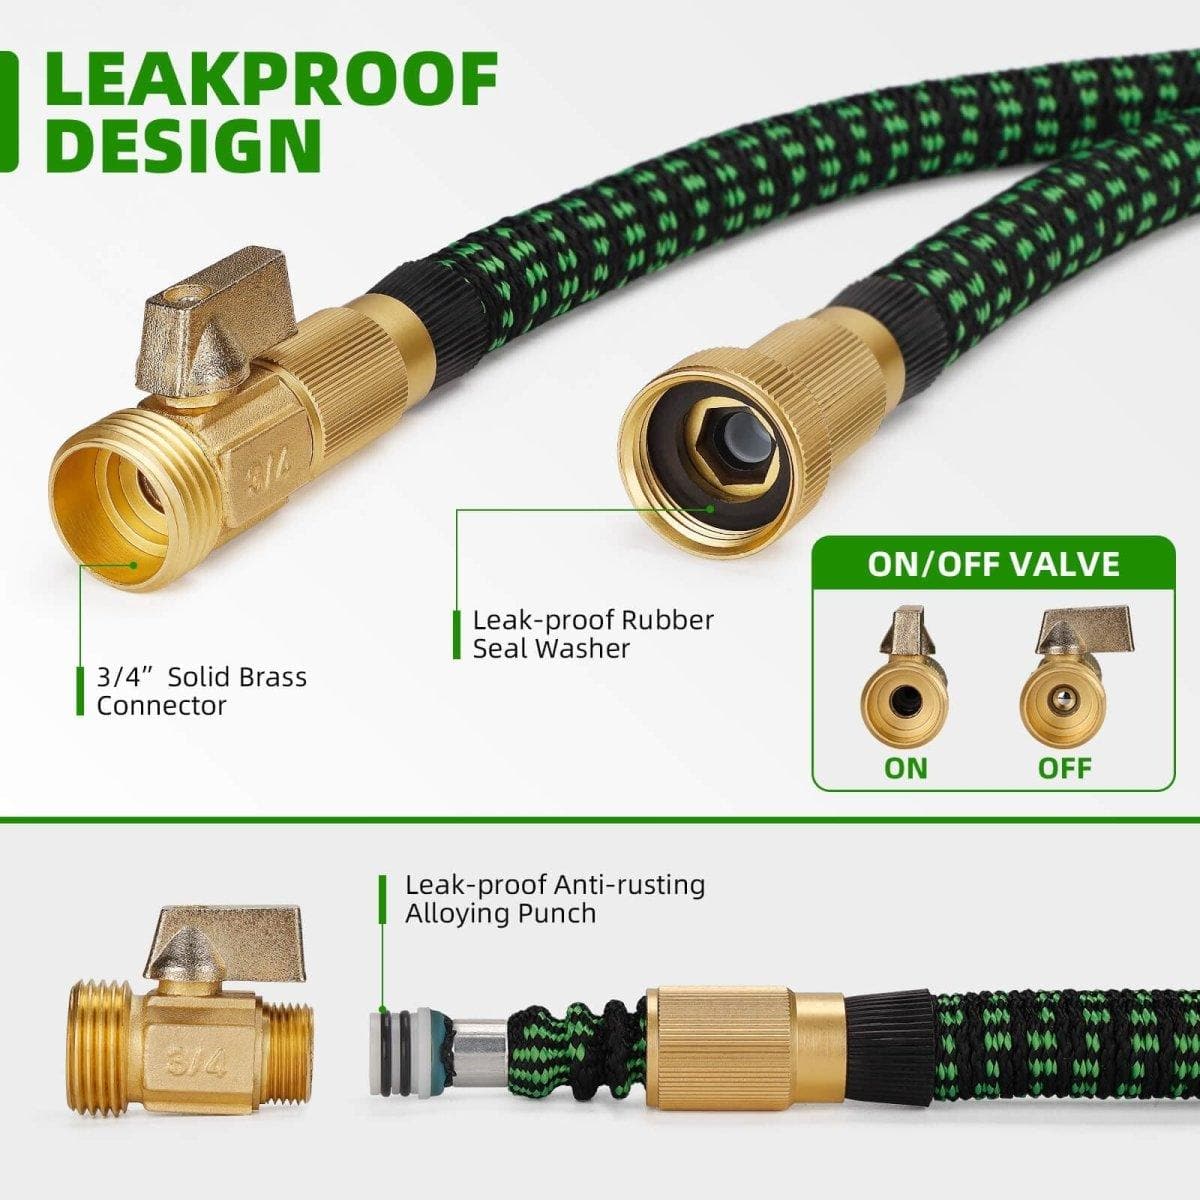 Huepar Flexible 100ft Garden Hose with 4-Layer Latex, 10 Function Spray Nozzle, and Solid Brass Fittings for Efficient Irrigation0